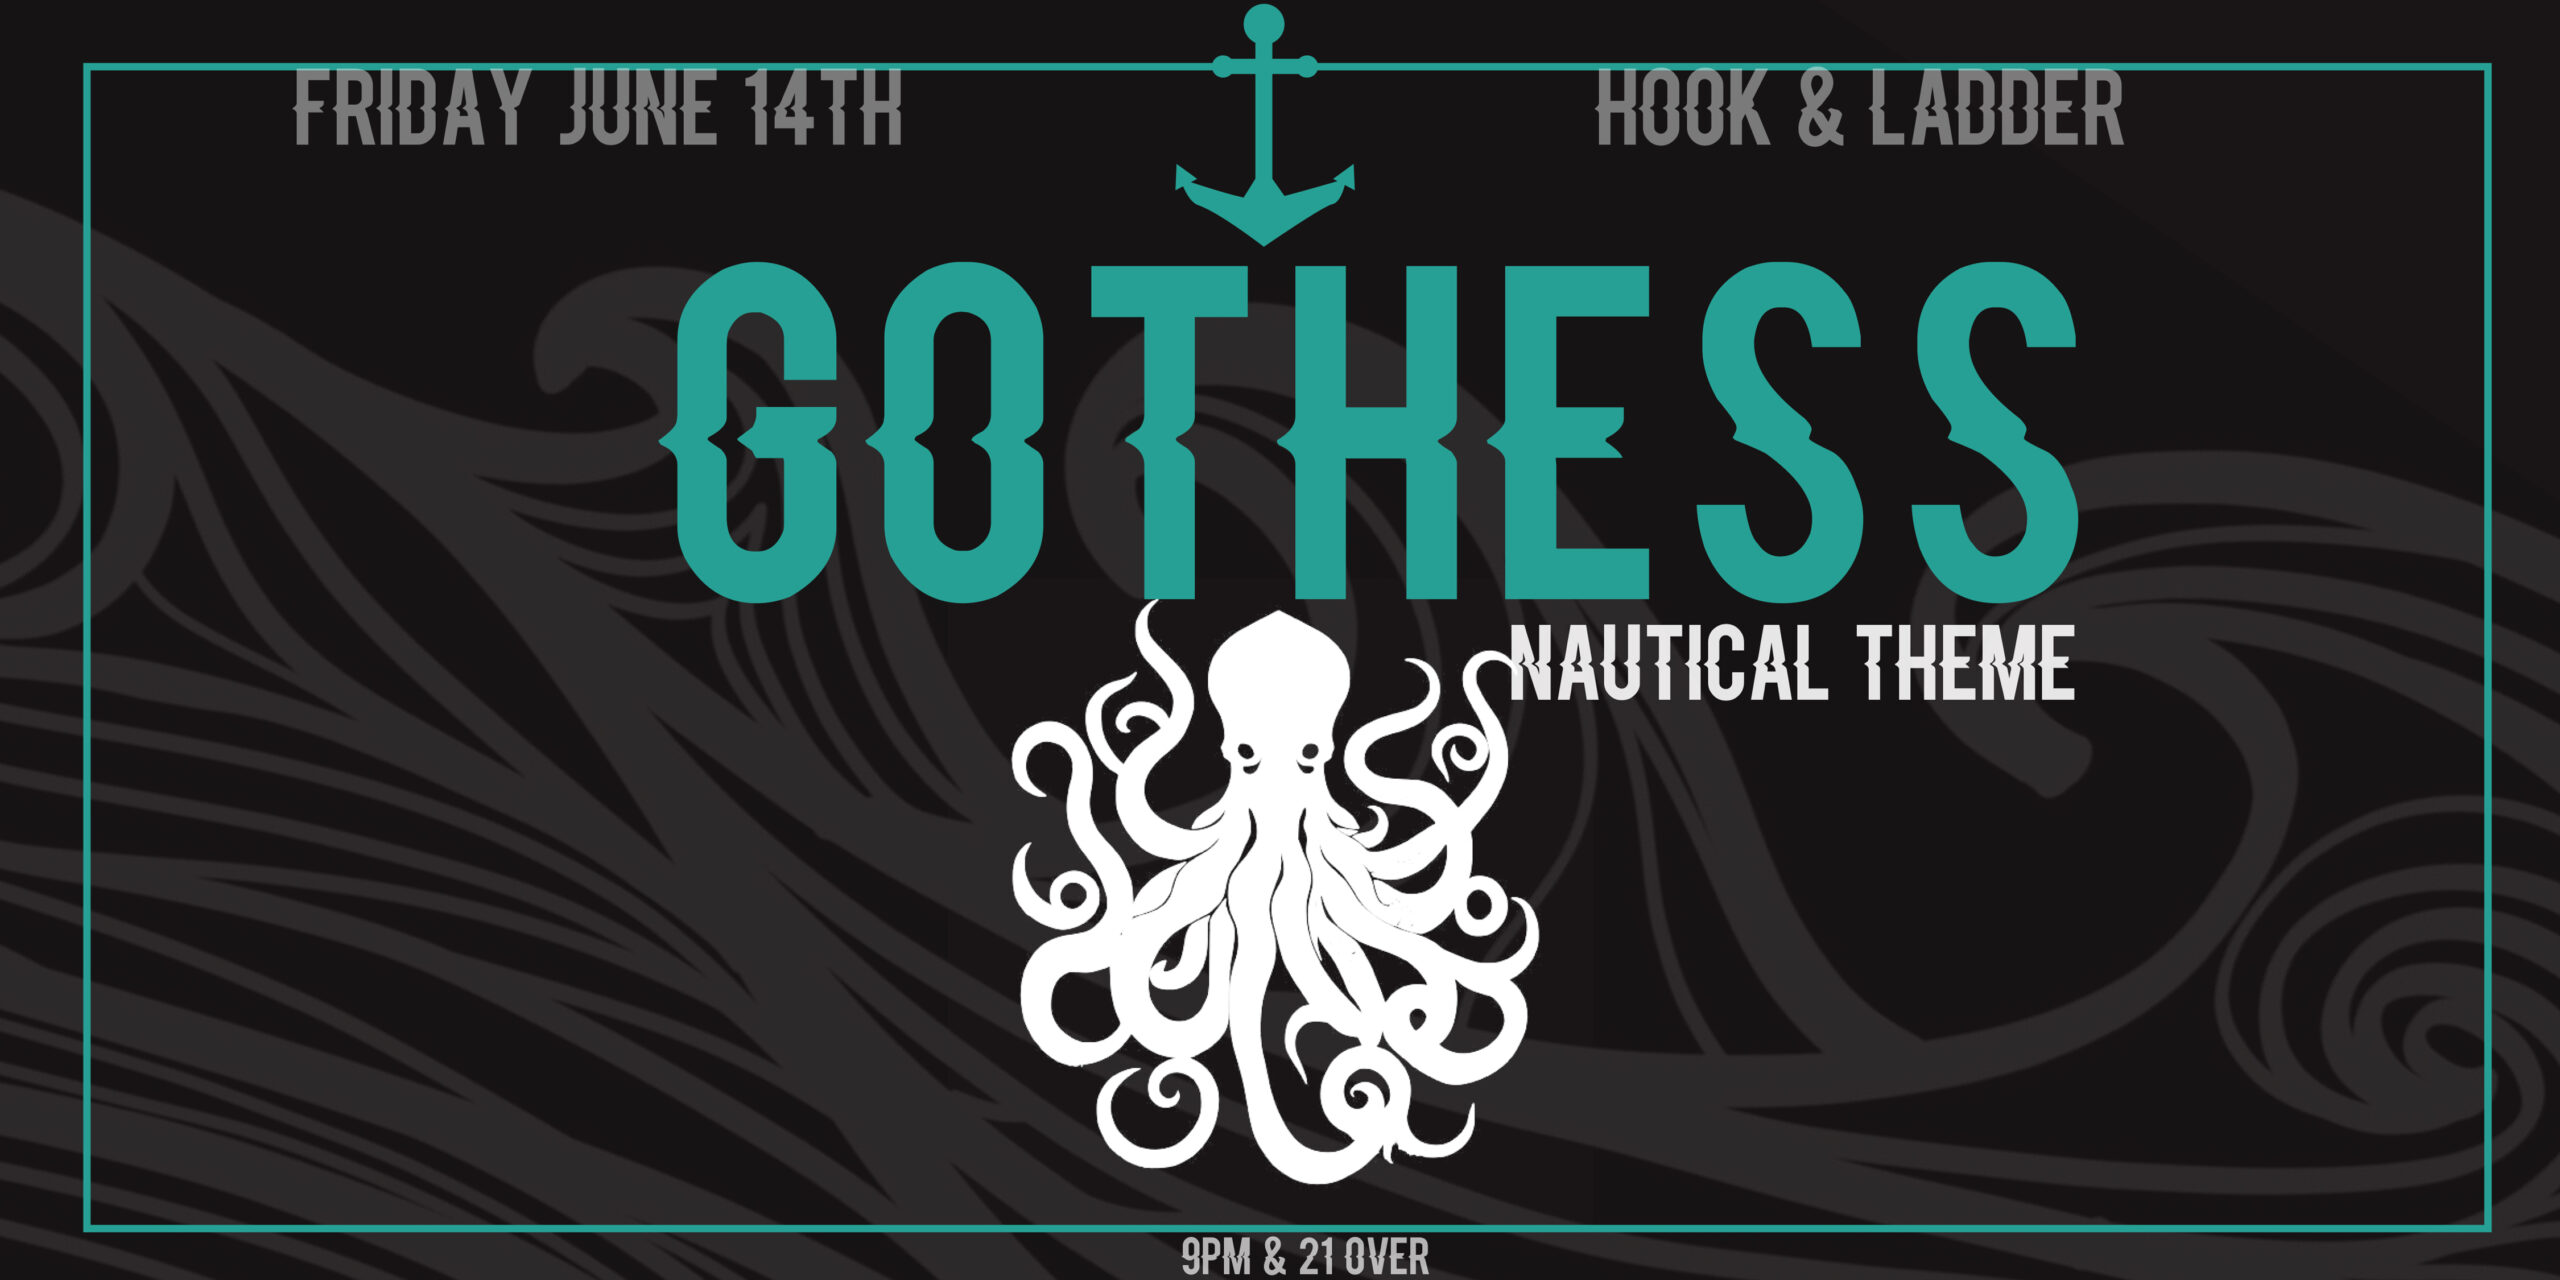 +Gothess+ Nautical Theme Selections by your Favorite Goth Queers! Featuring DJ Q (Gothess) & Guest! Friday June 14 The Hook and Ladder Theater Doors 9:00pm :: Music 9:00pm :: 21+ General Admission * $15 ADV / $20 DOS * Does not include fees NO REFUNDS Tickets On-Sale Now